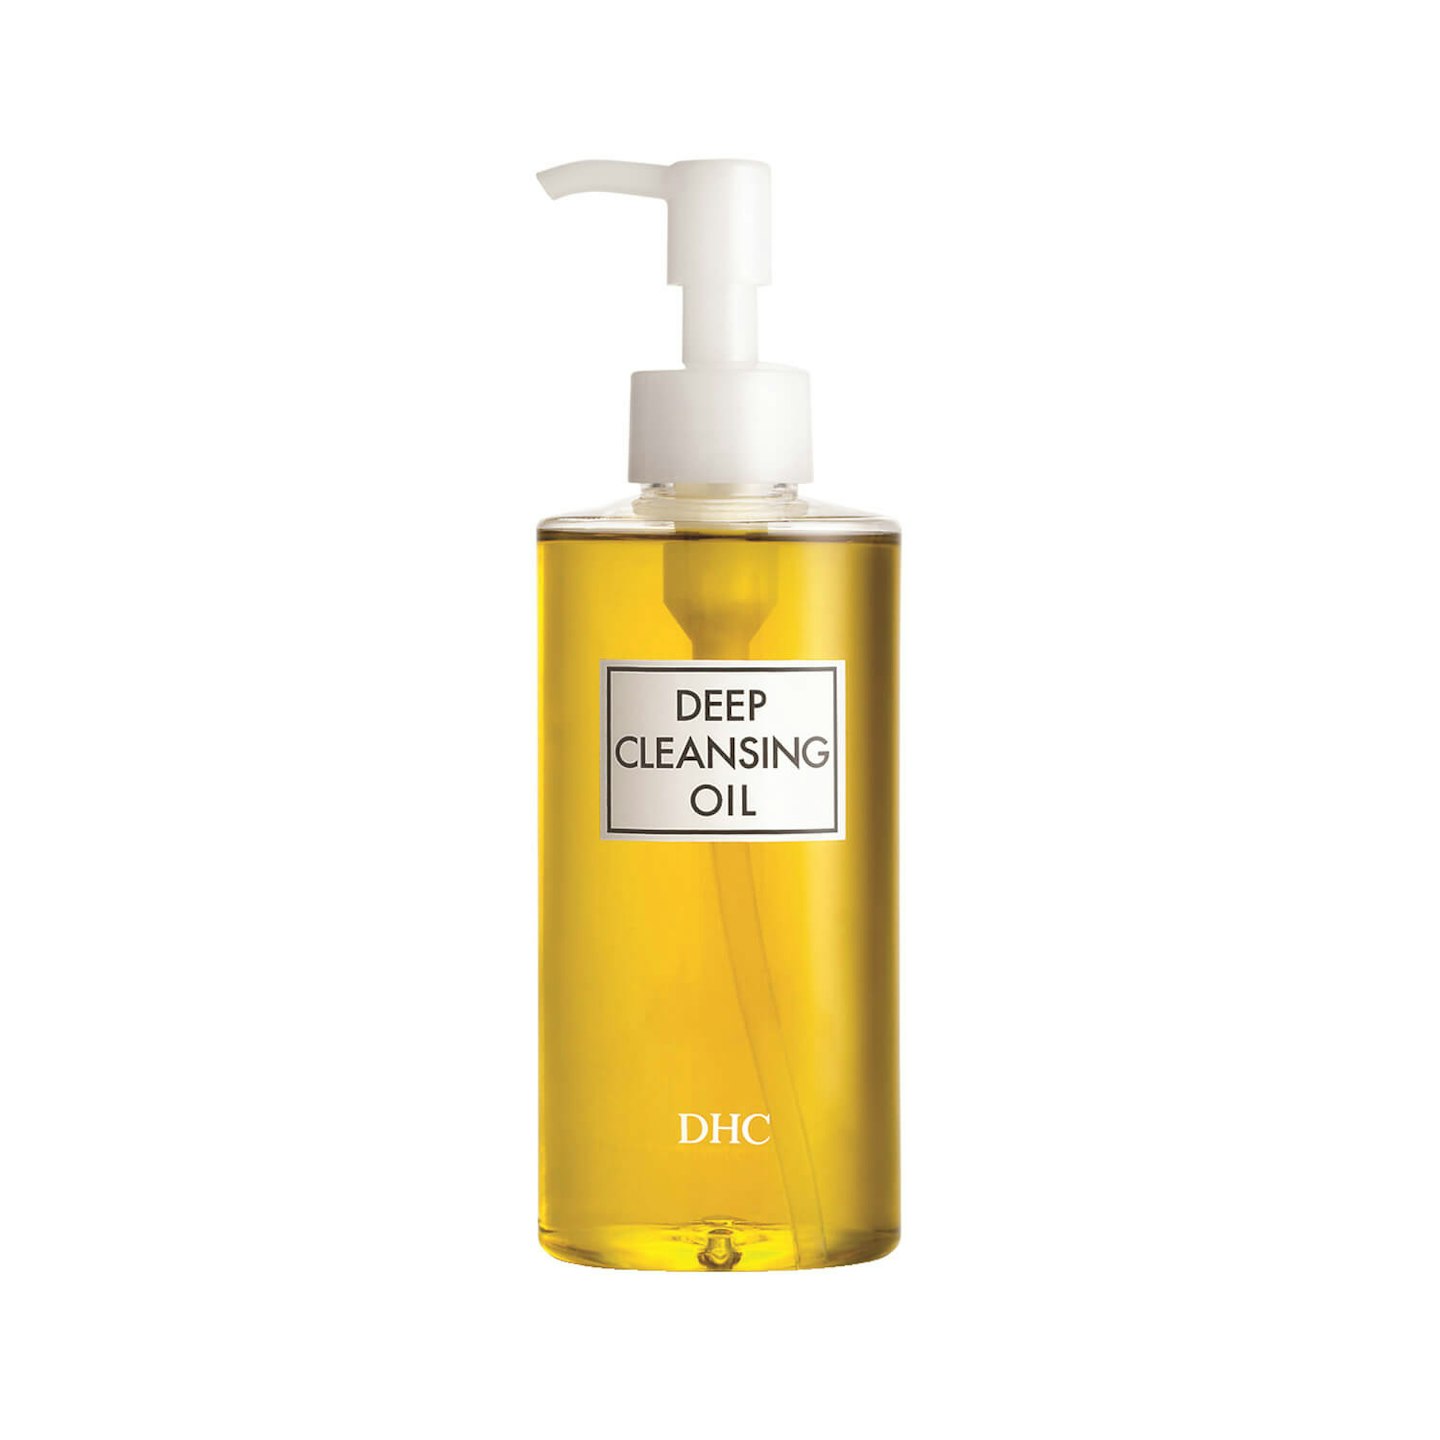 DHC, Deep Cleansing Oil, £24